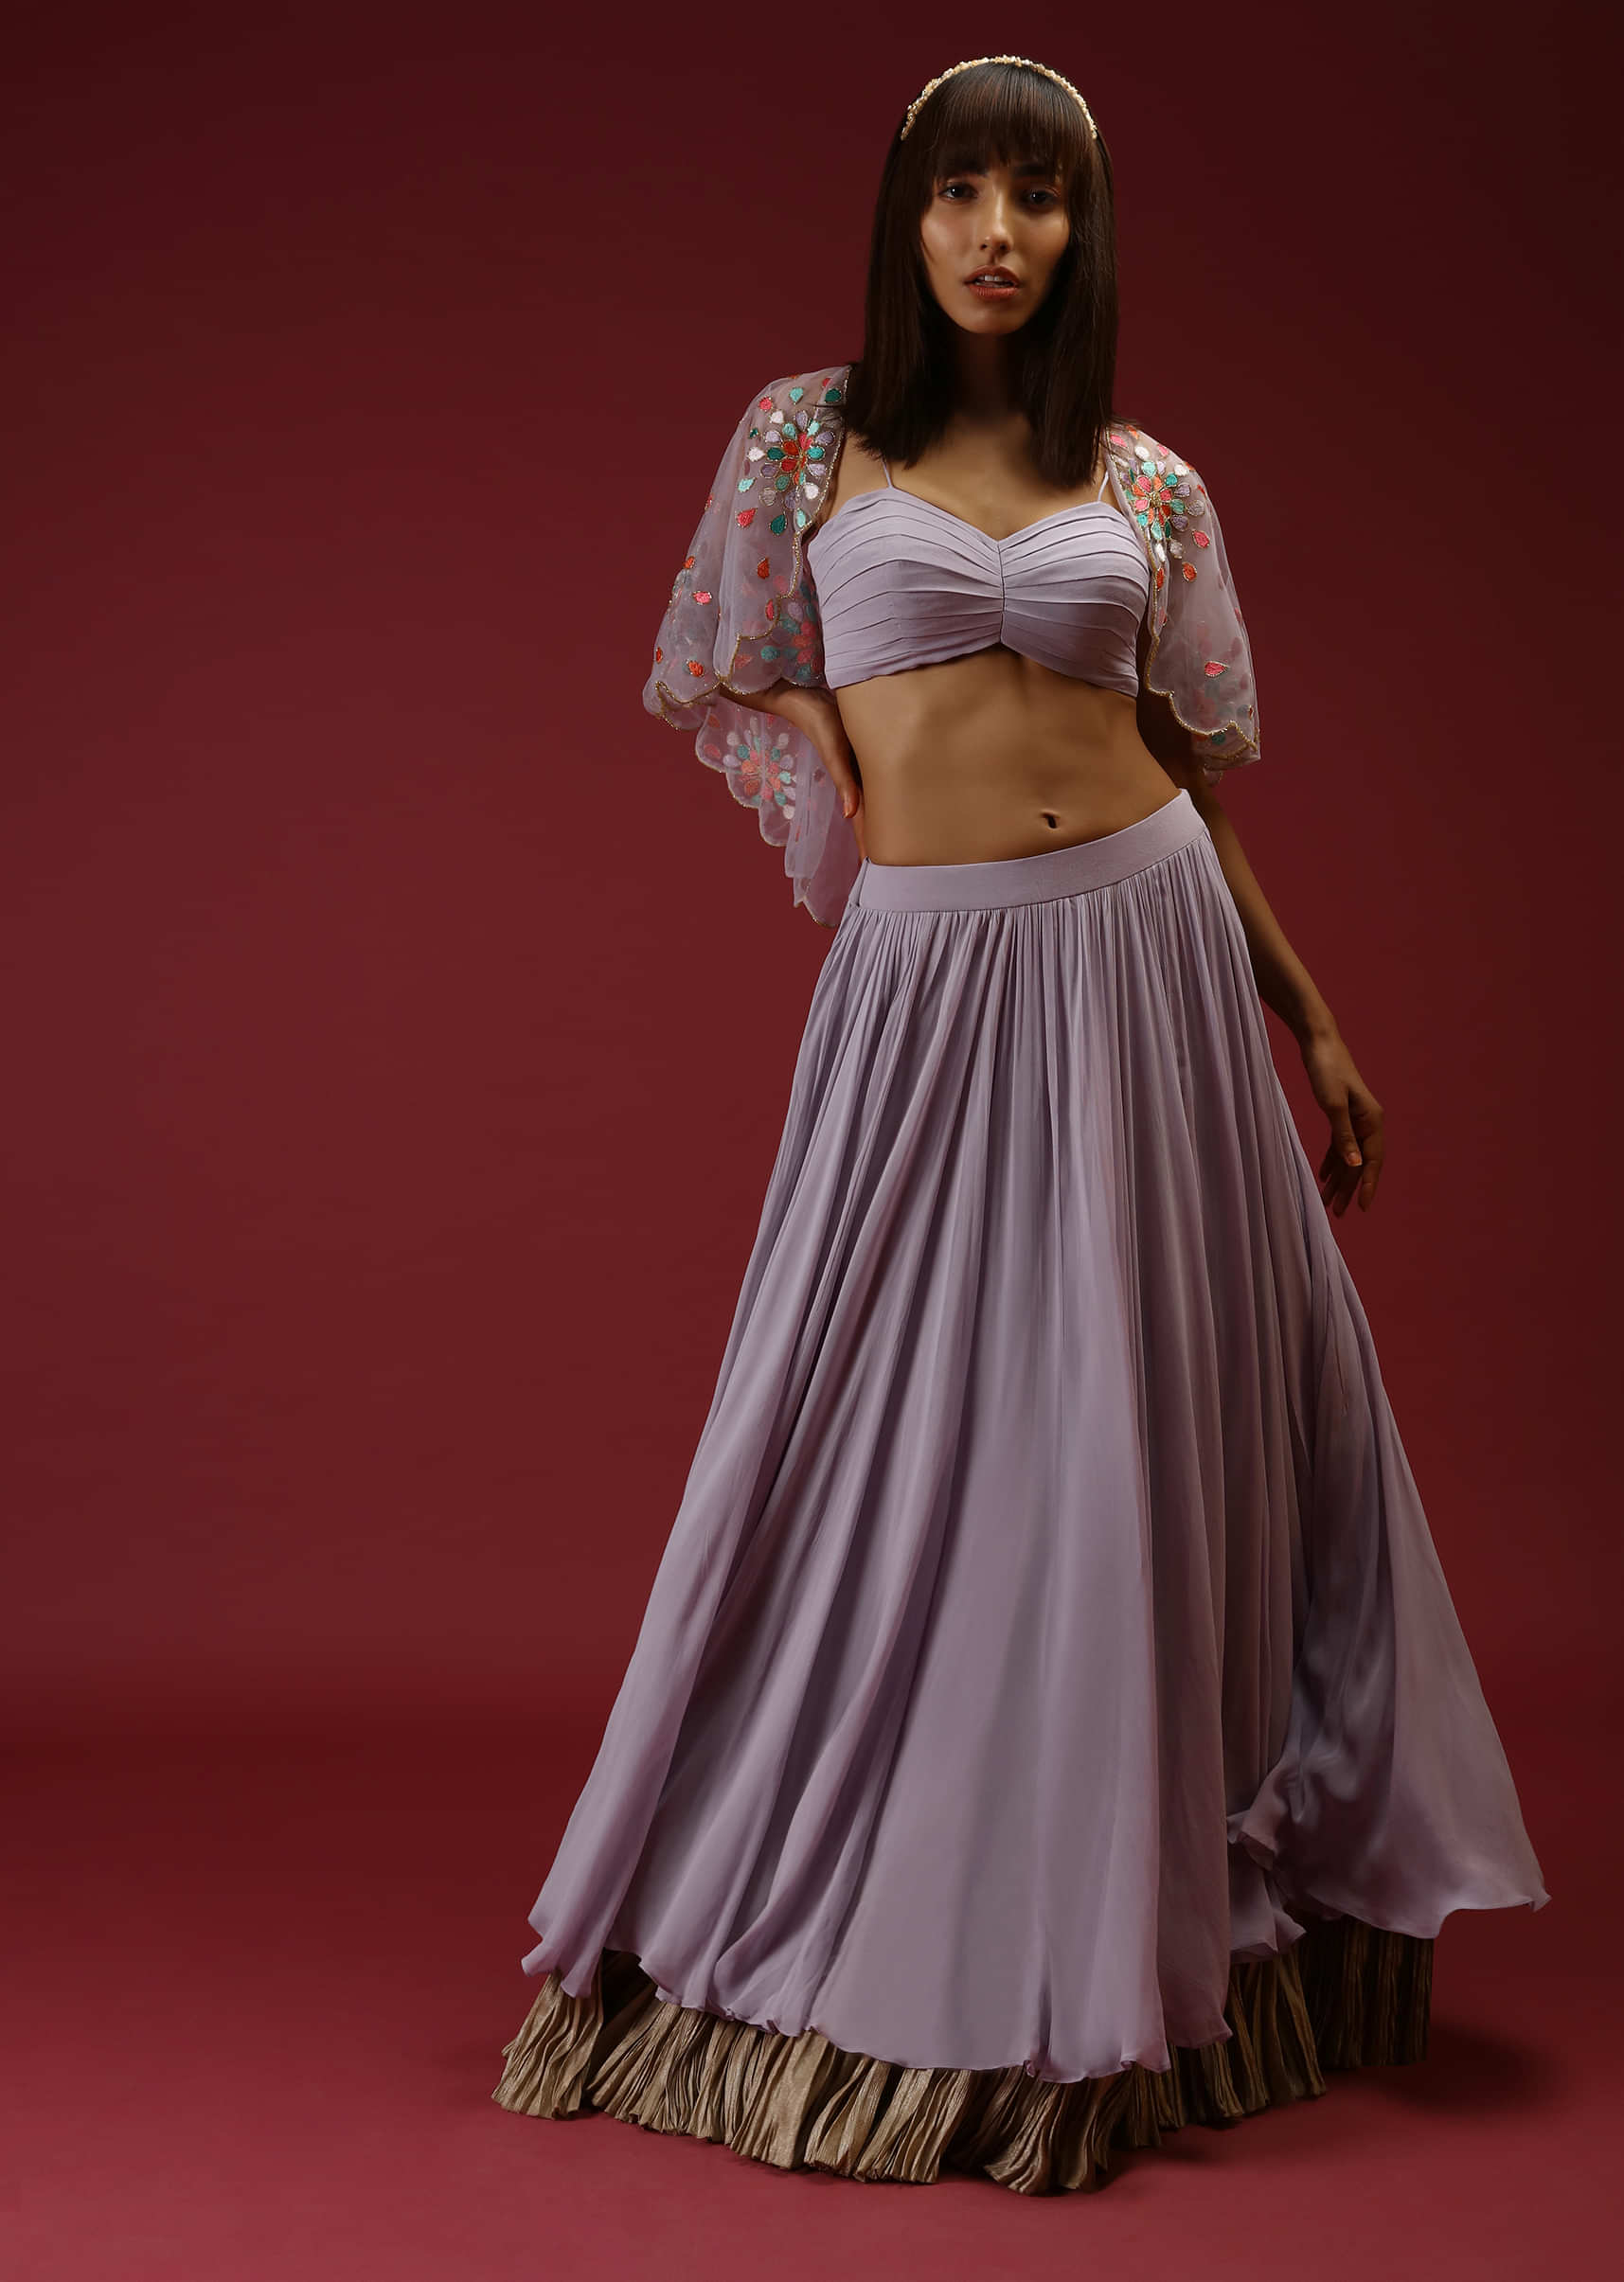 Lavender Skirt And Crop Top Set With Pleat Detailing And A Multi Colored Resham Embroidered Short Cape 